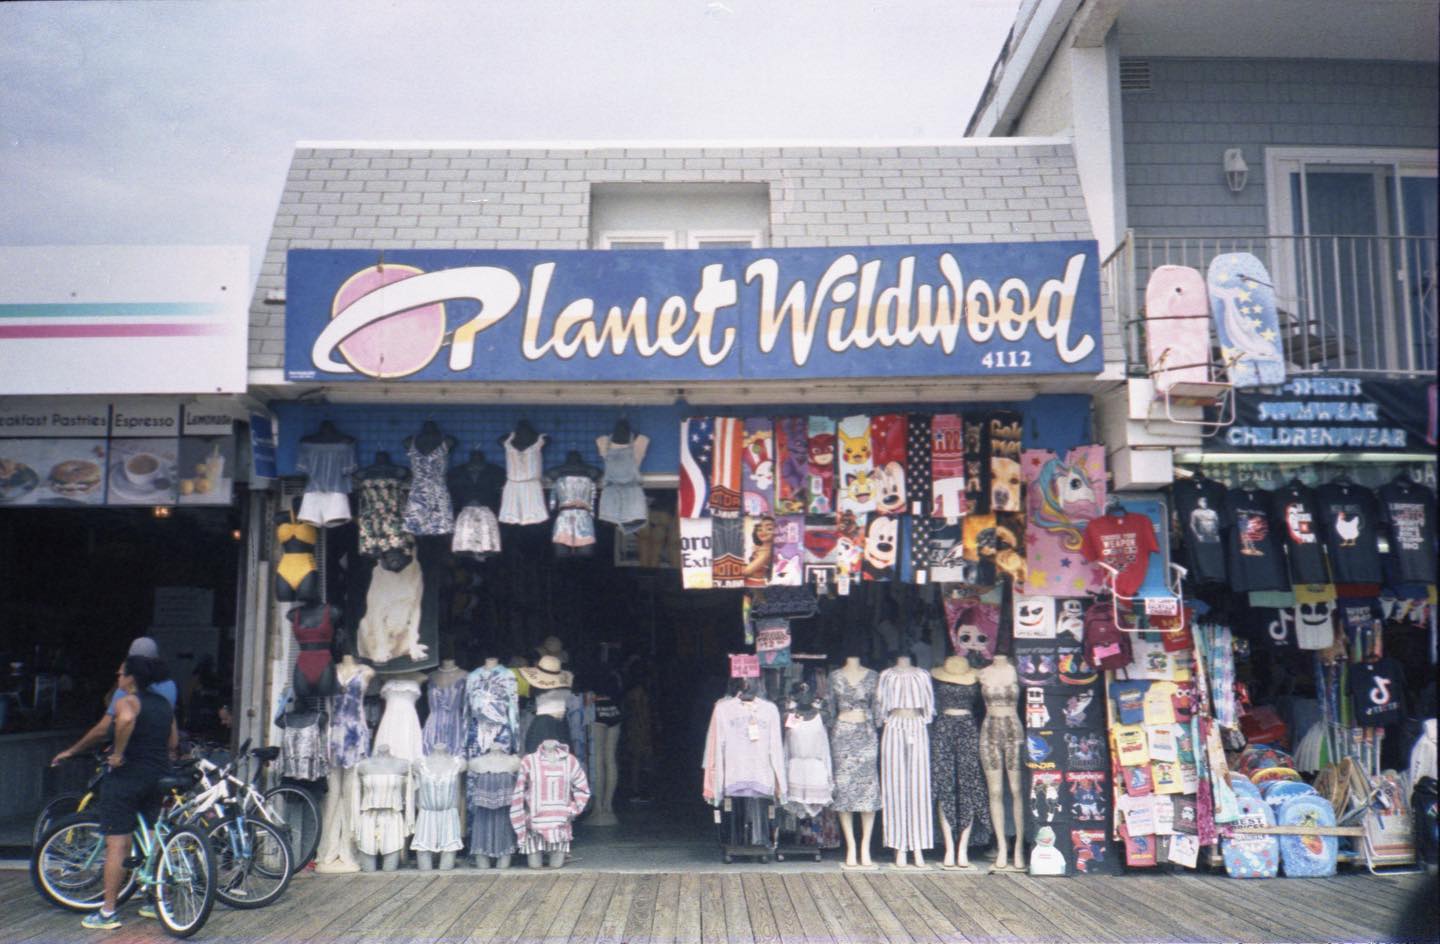 Planet Wildwood. Shot on Shur-Fine Color 200 (made in Germany, so some kind of Agfa film) with the #olympusxa. #agfacolor #film #filmphotography #staybrokeshootfilm